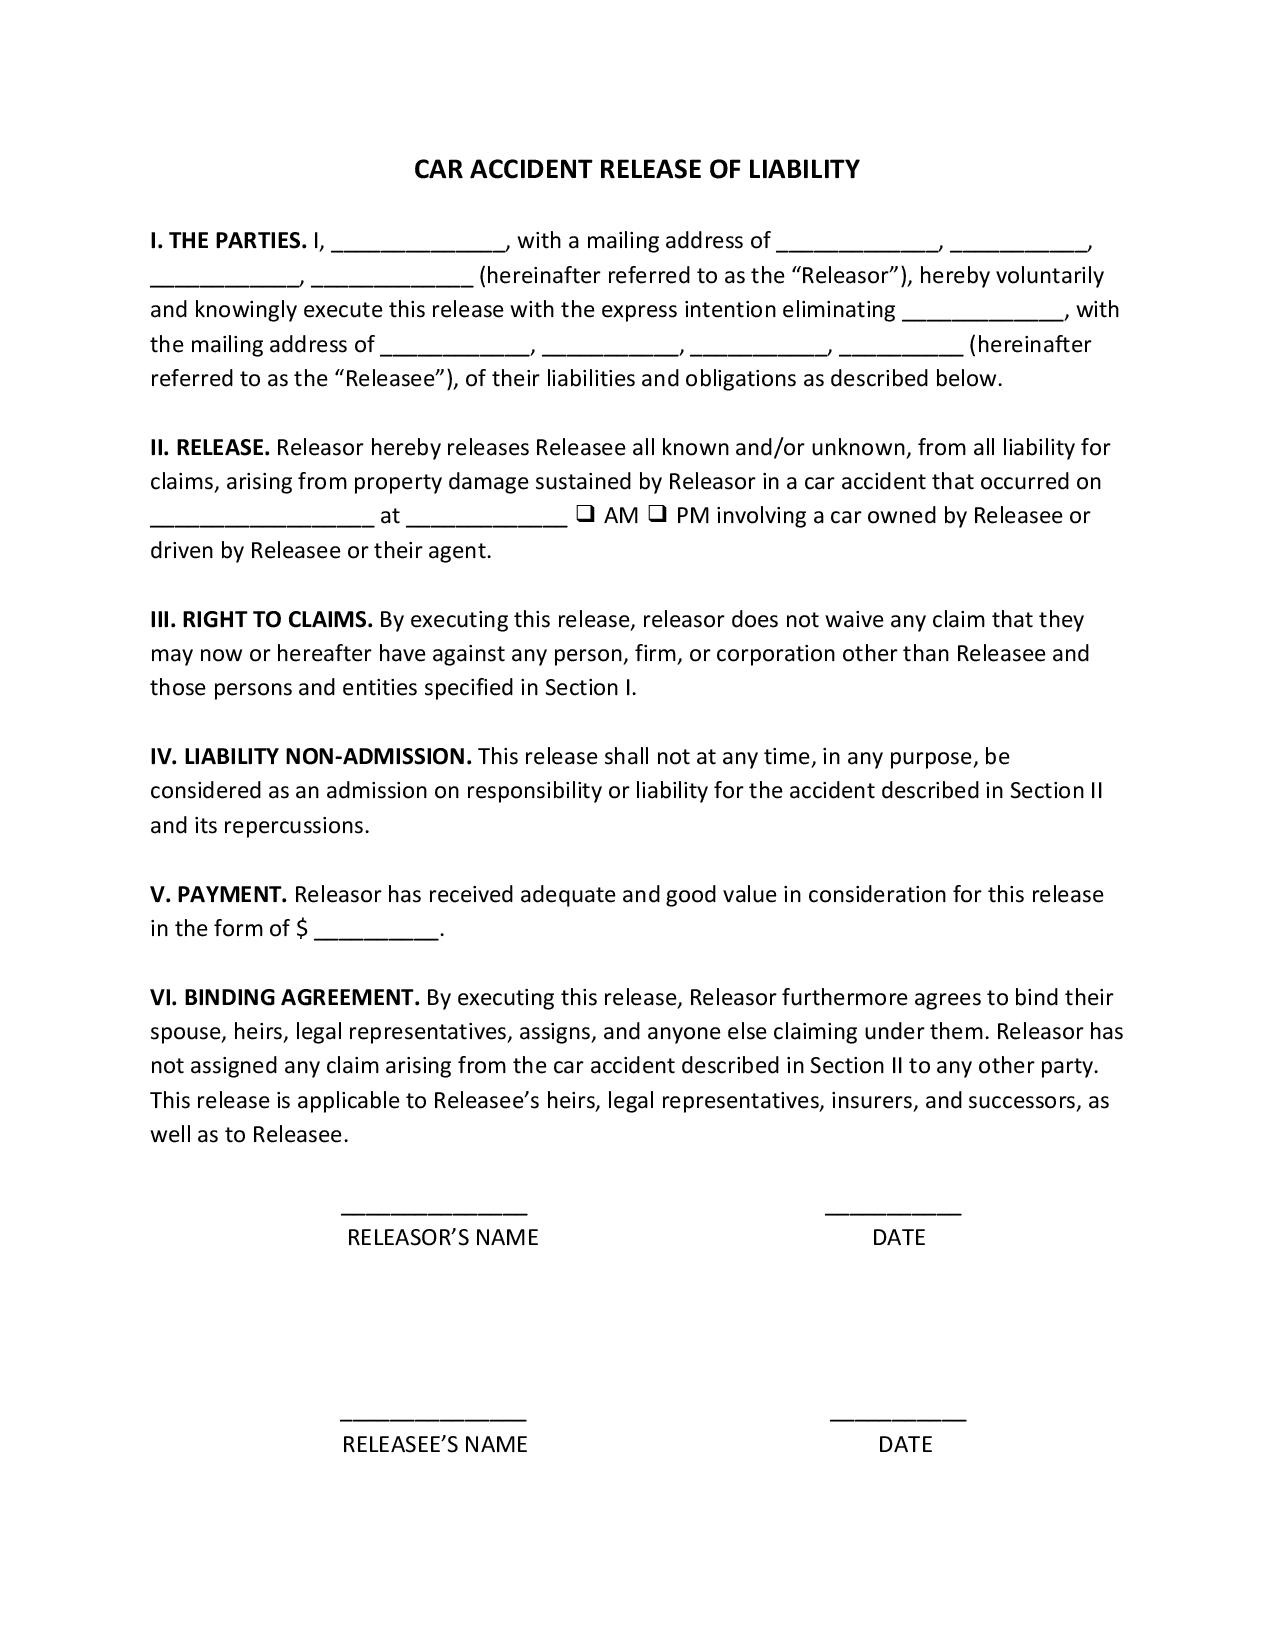 Car Accident Release of Liability